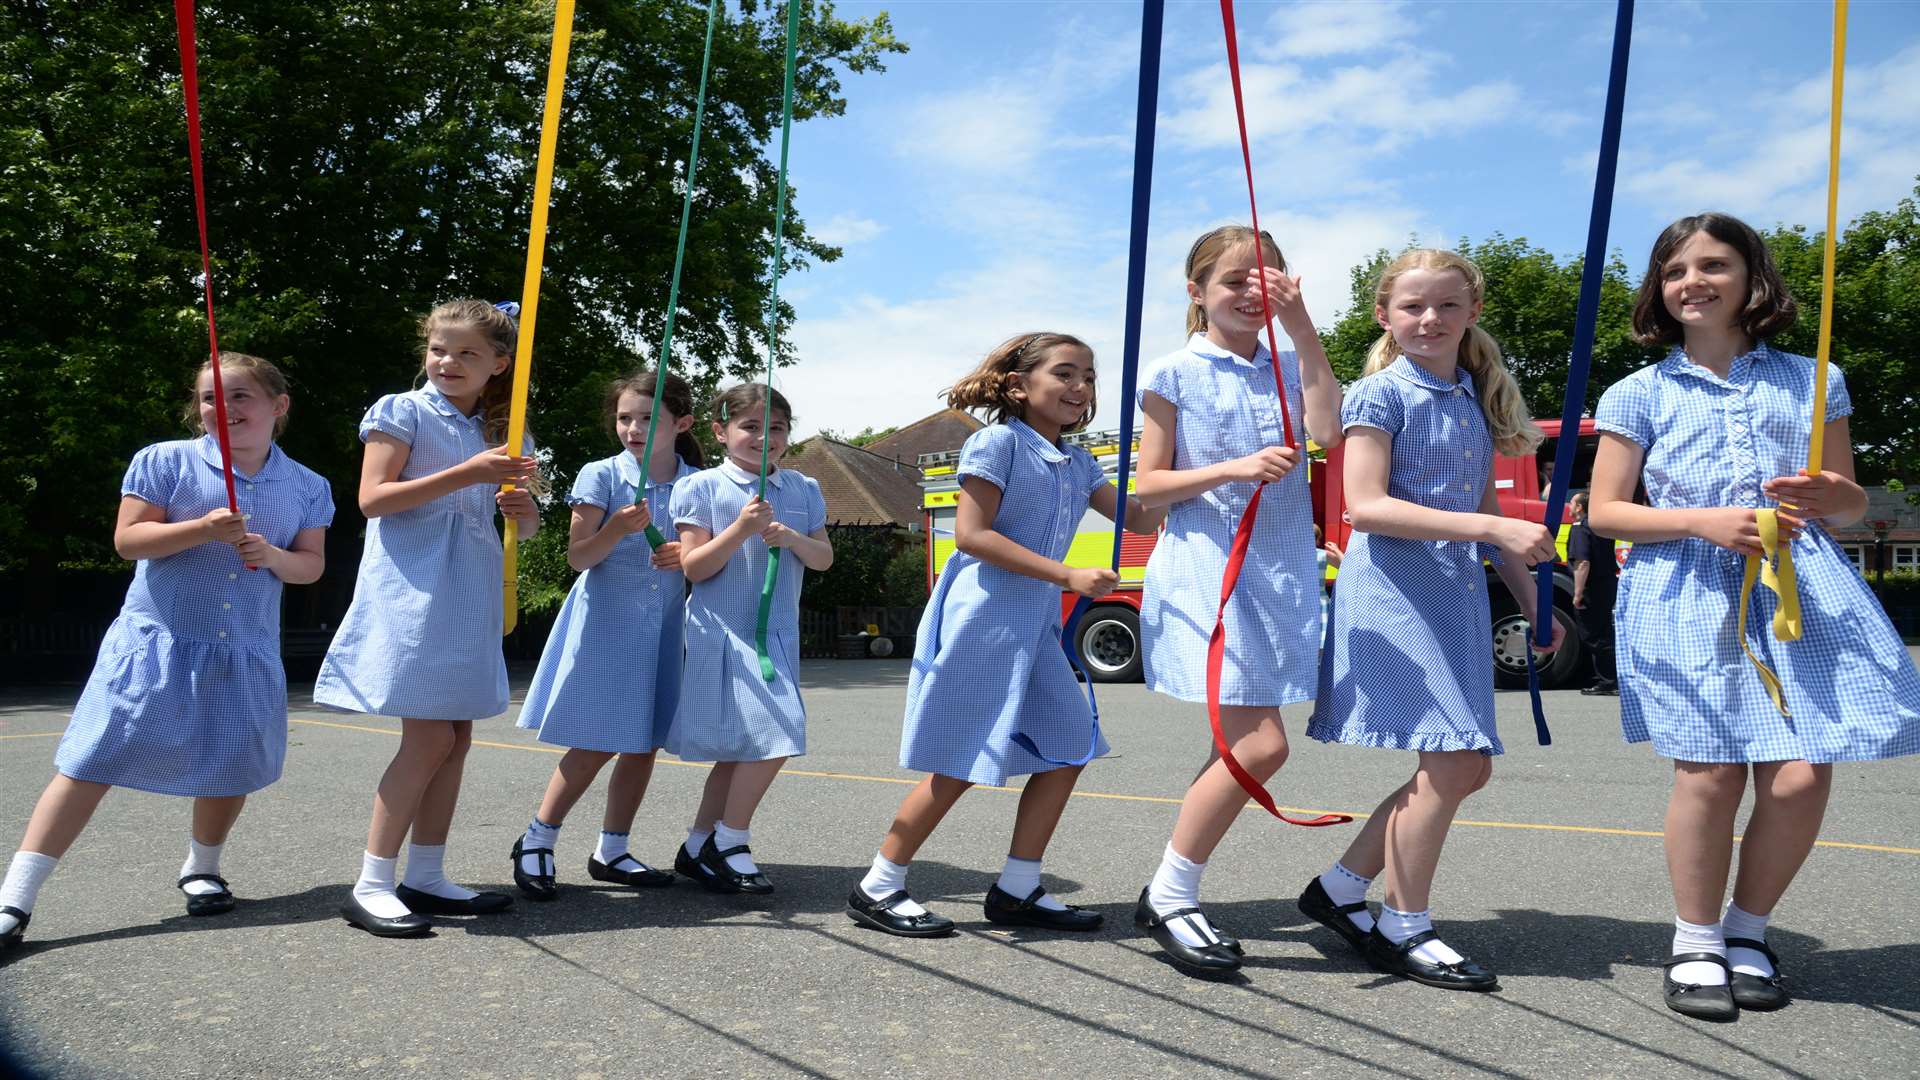 Pupils dancing around the Maypole at the Sheldwich Primary School summer music festival